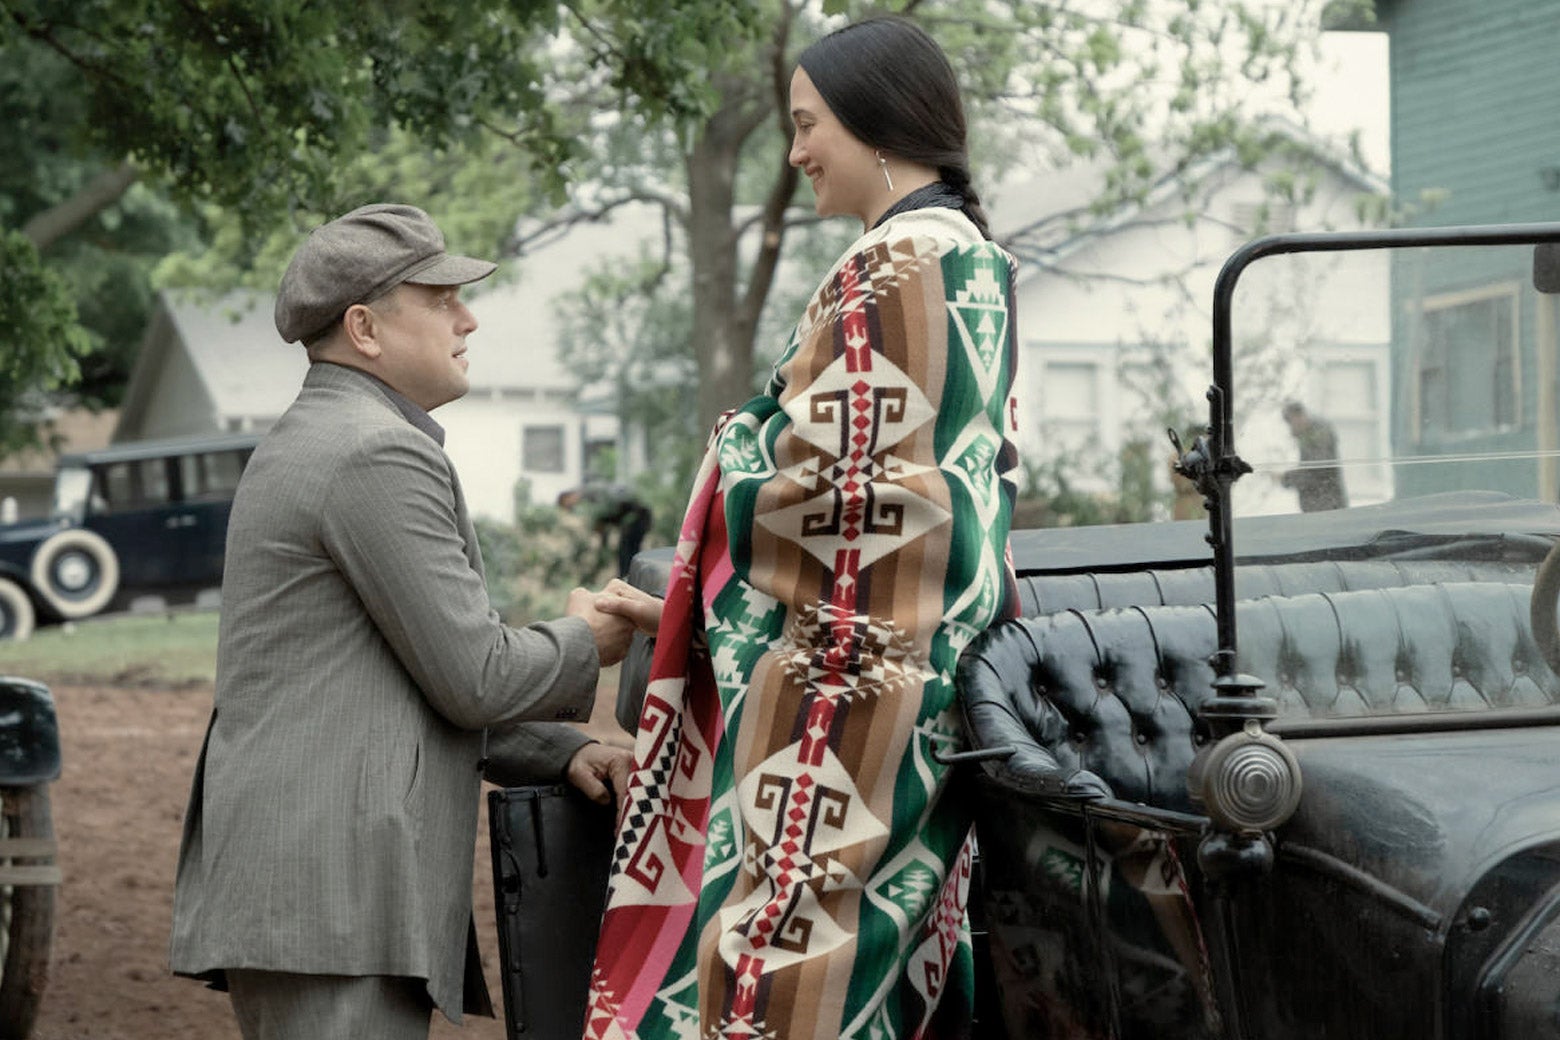 Leonardo DiCaprio helps Lily Gladstone down from a 1920s car in a scene from the movie. 